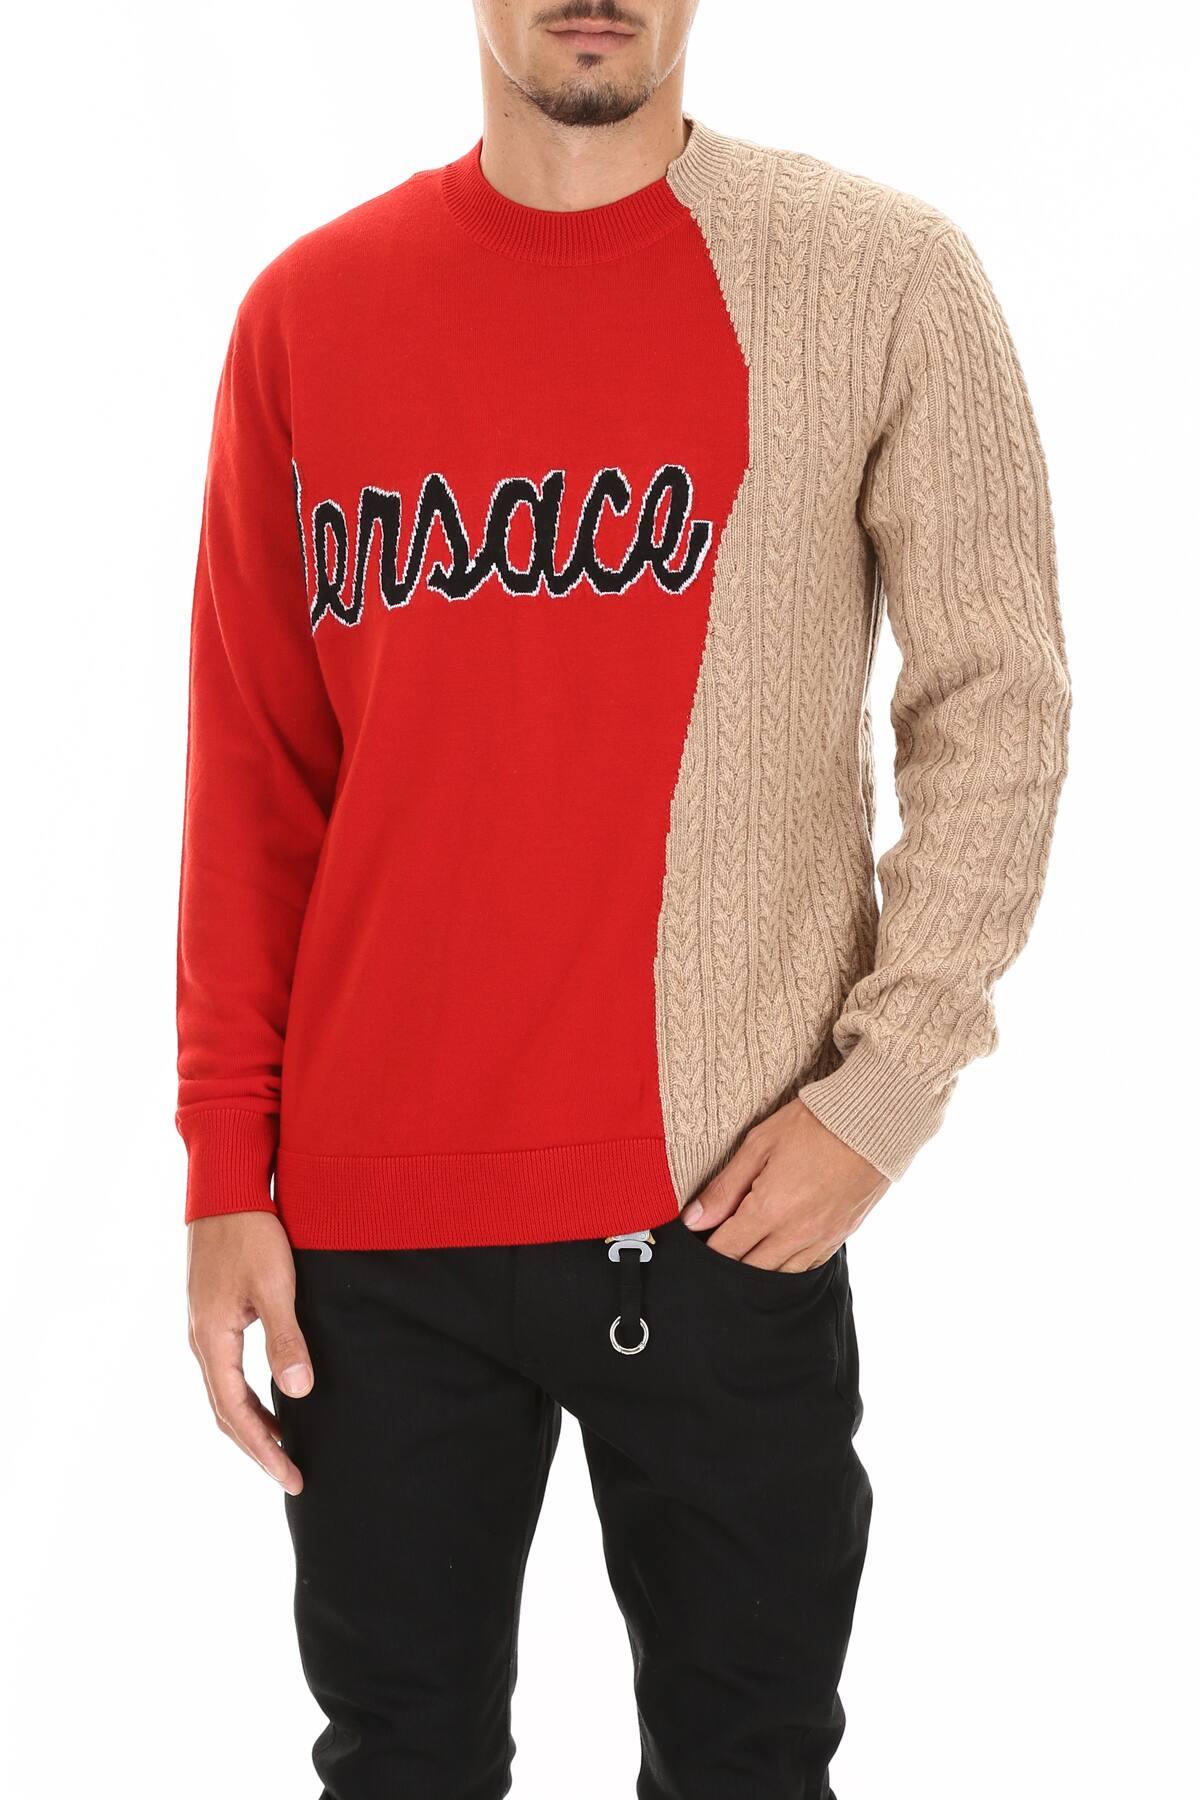 Versace Bicolour Logo Knit Sweater in Beige,Red (Red) for Men - Lyst